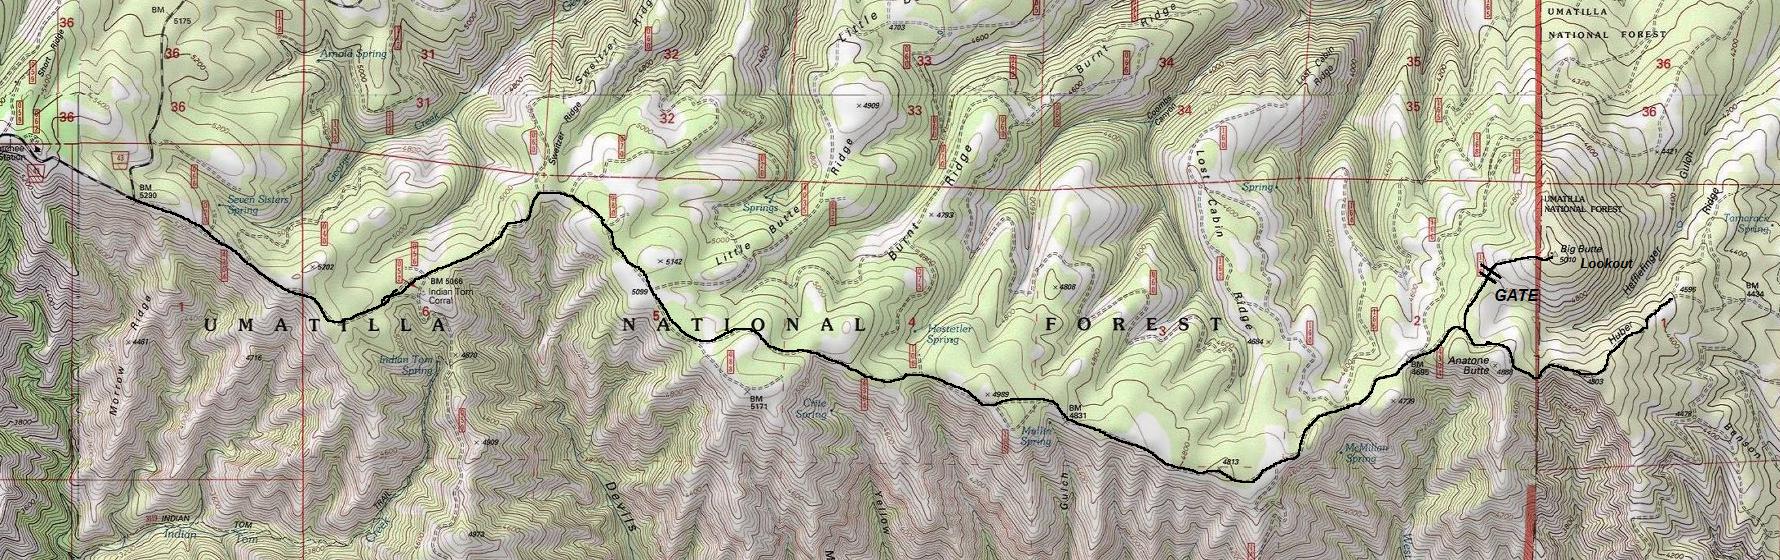 Big Butte lookout map